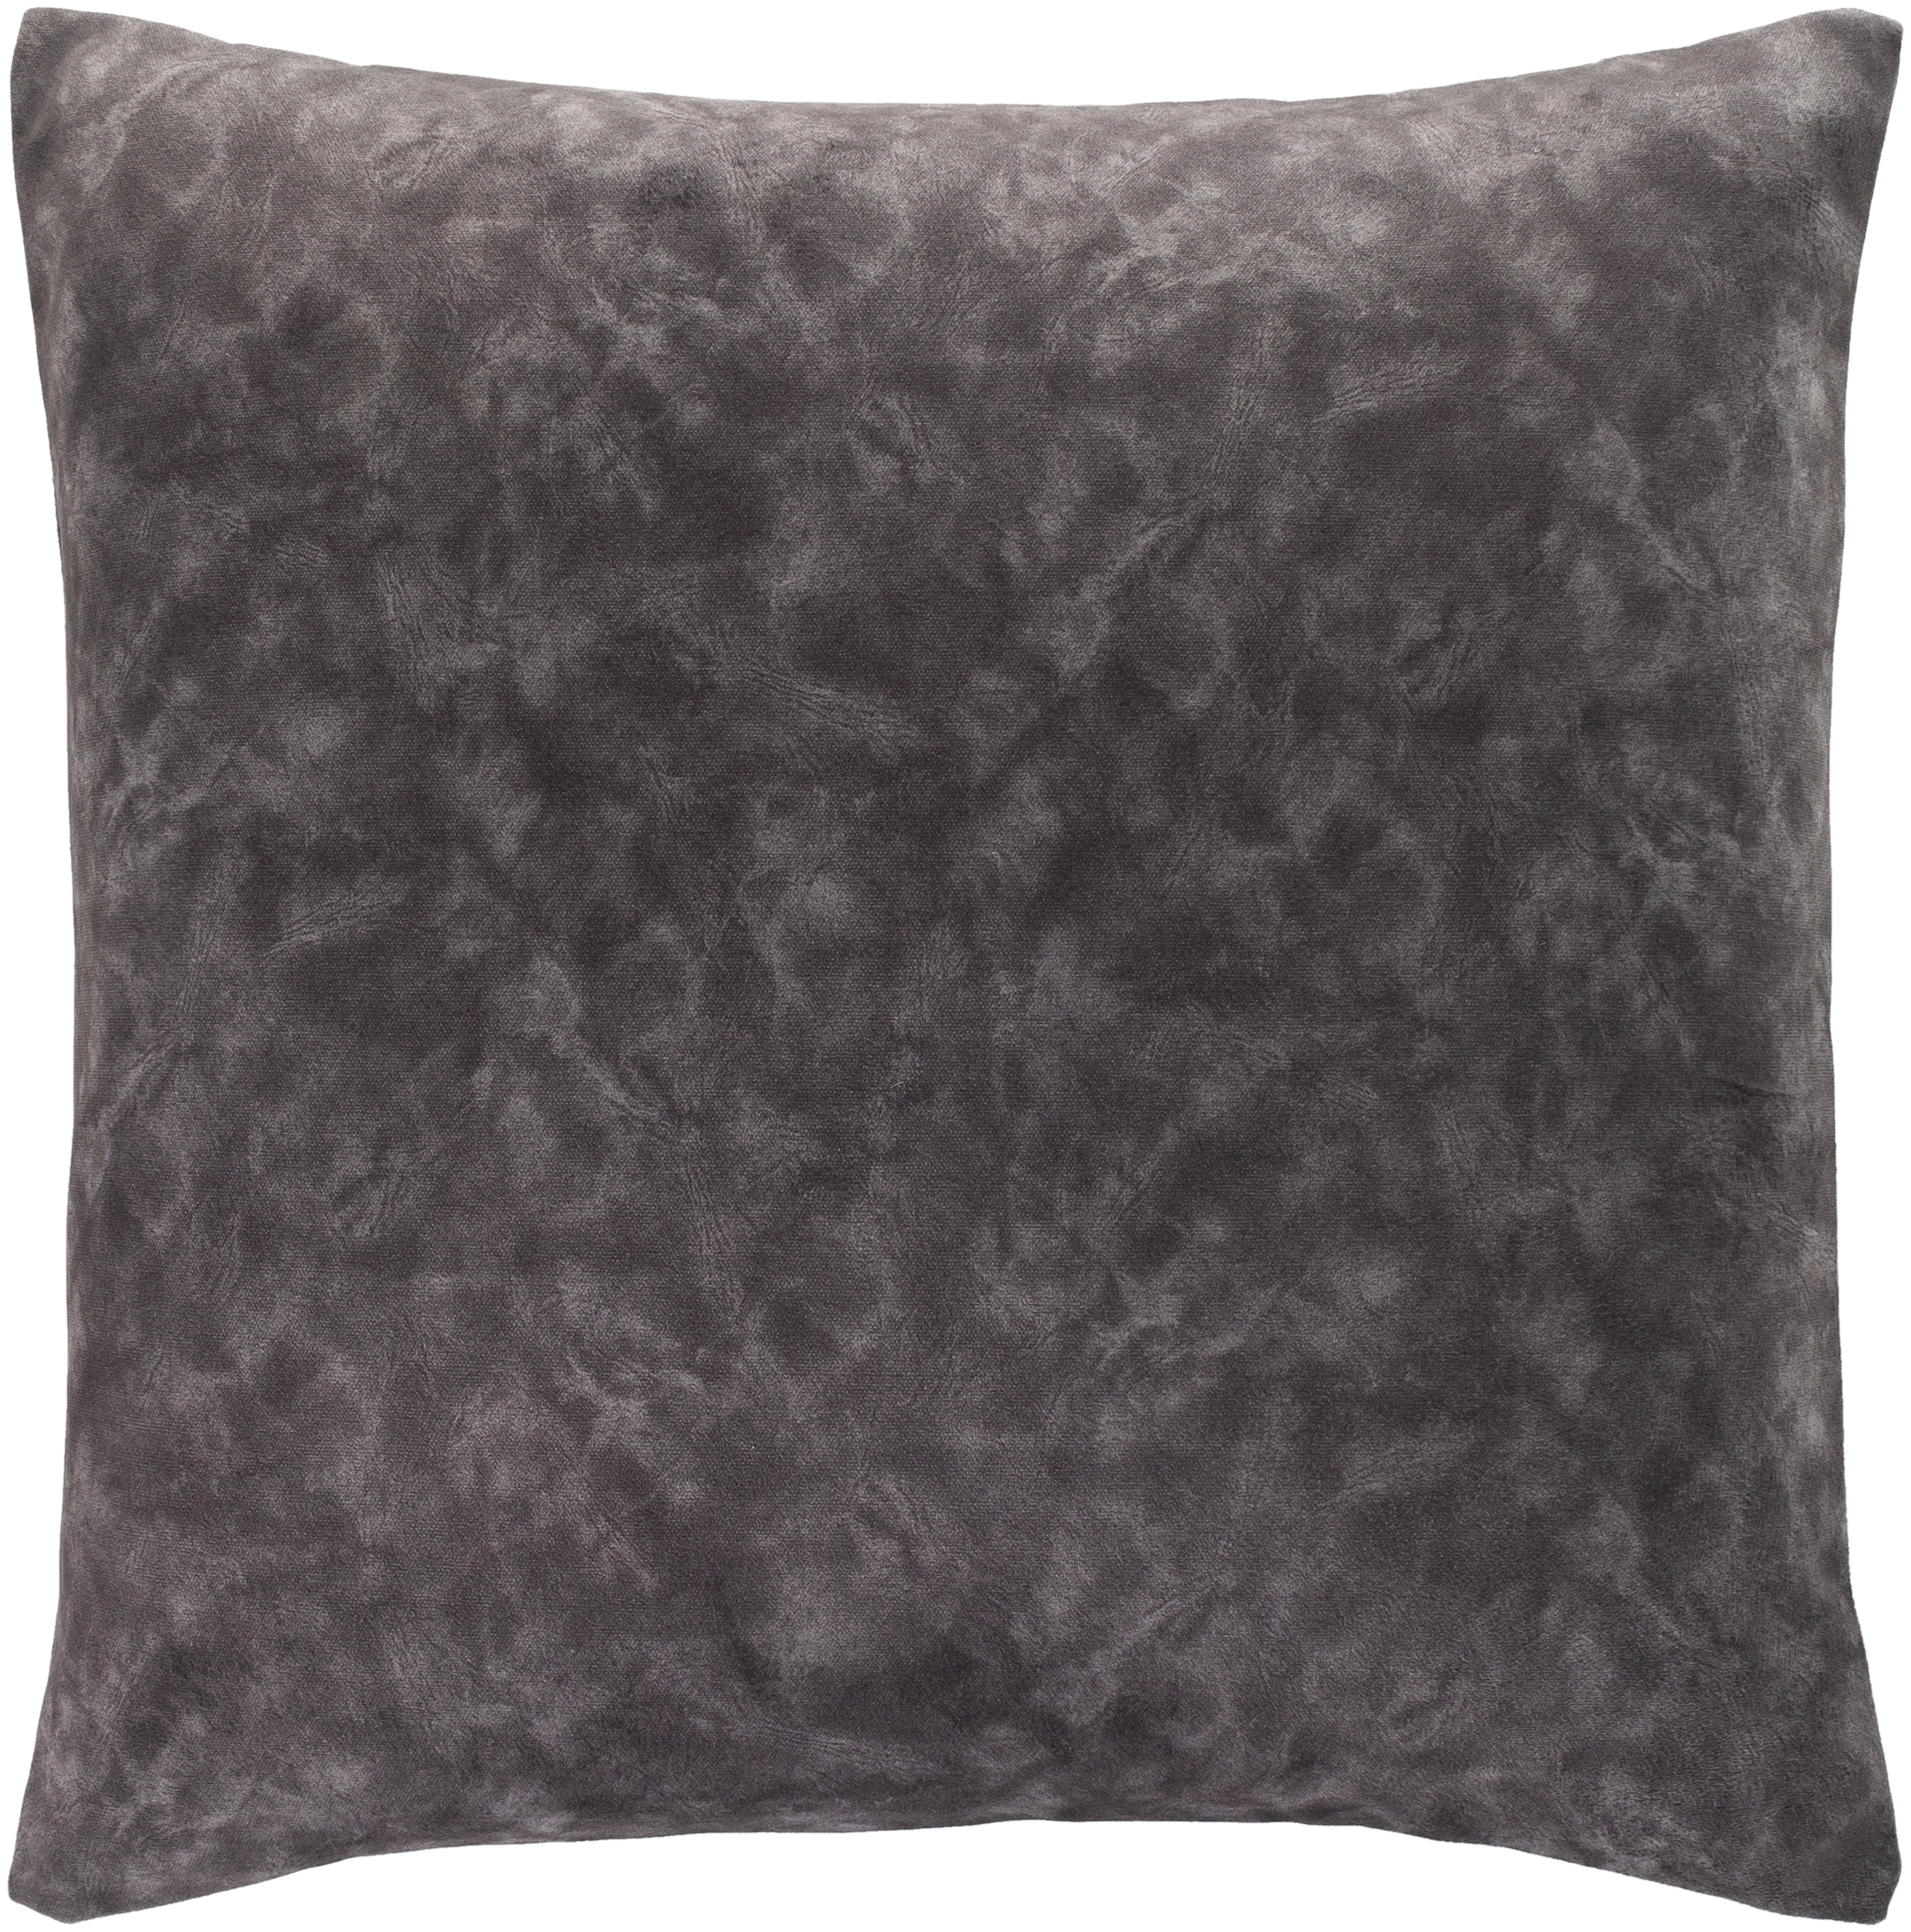 Collins Throw Pillow, 20" x 20", with down insert - Image 0